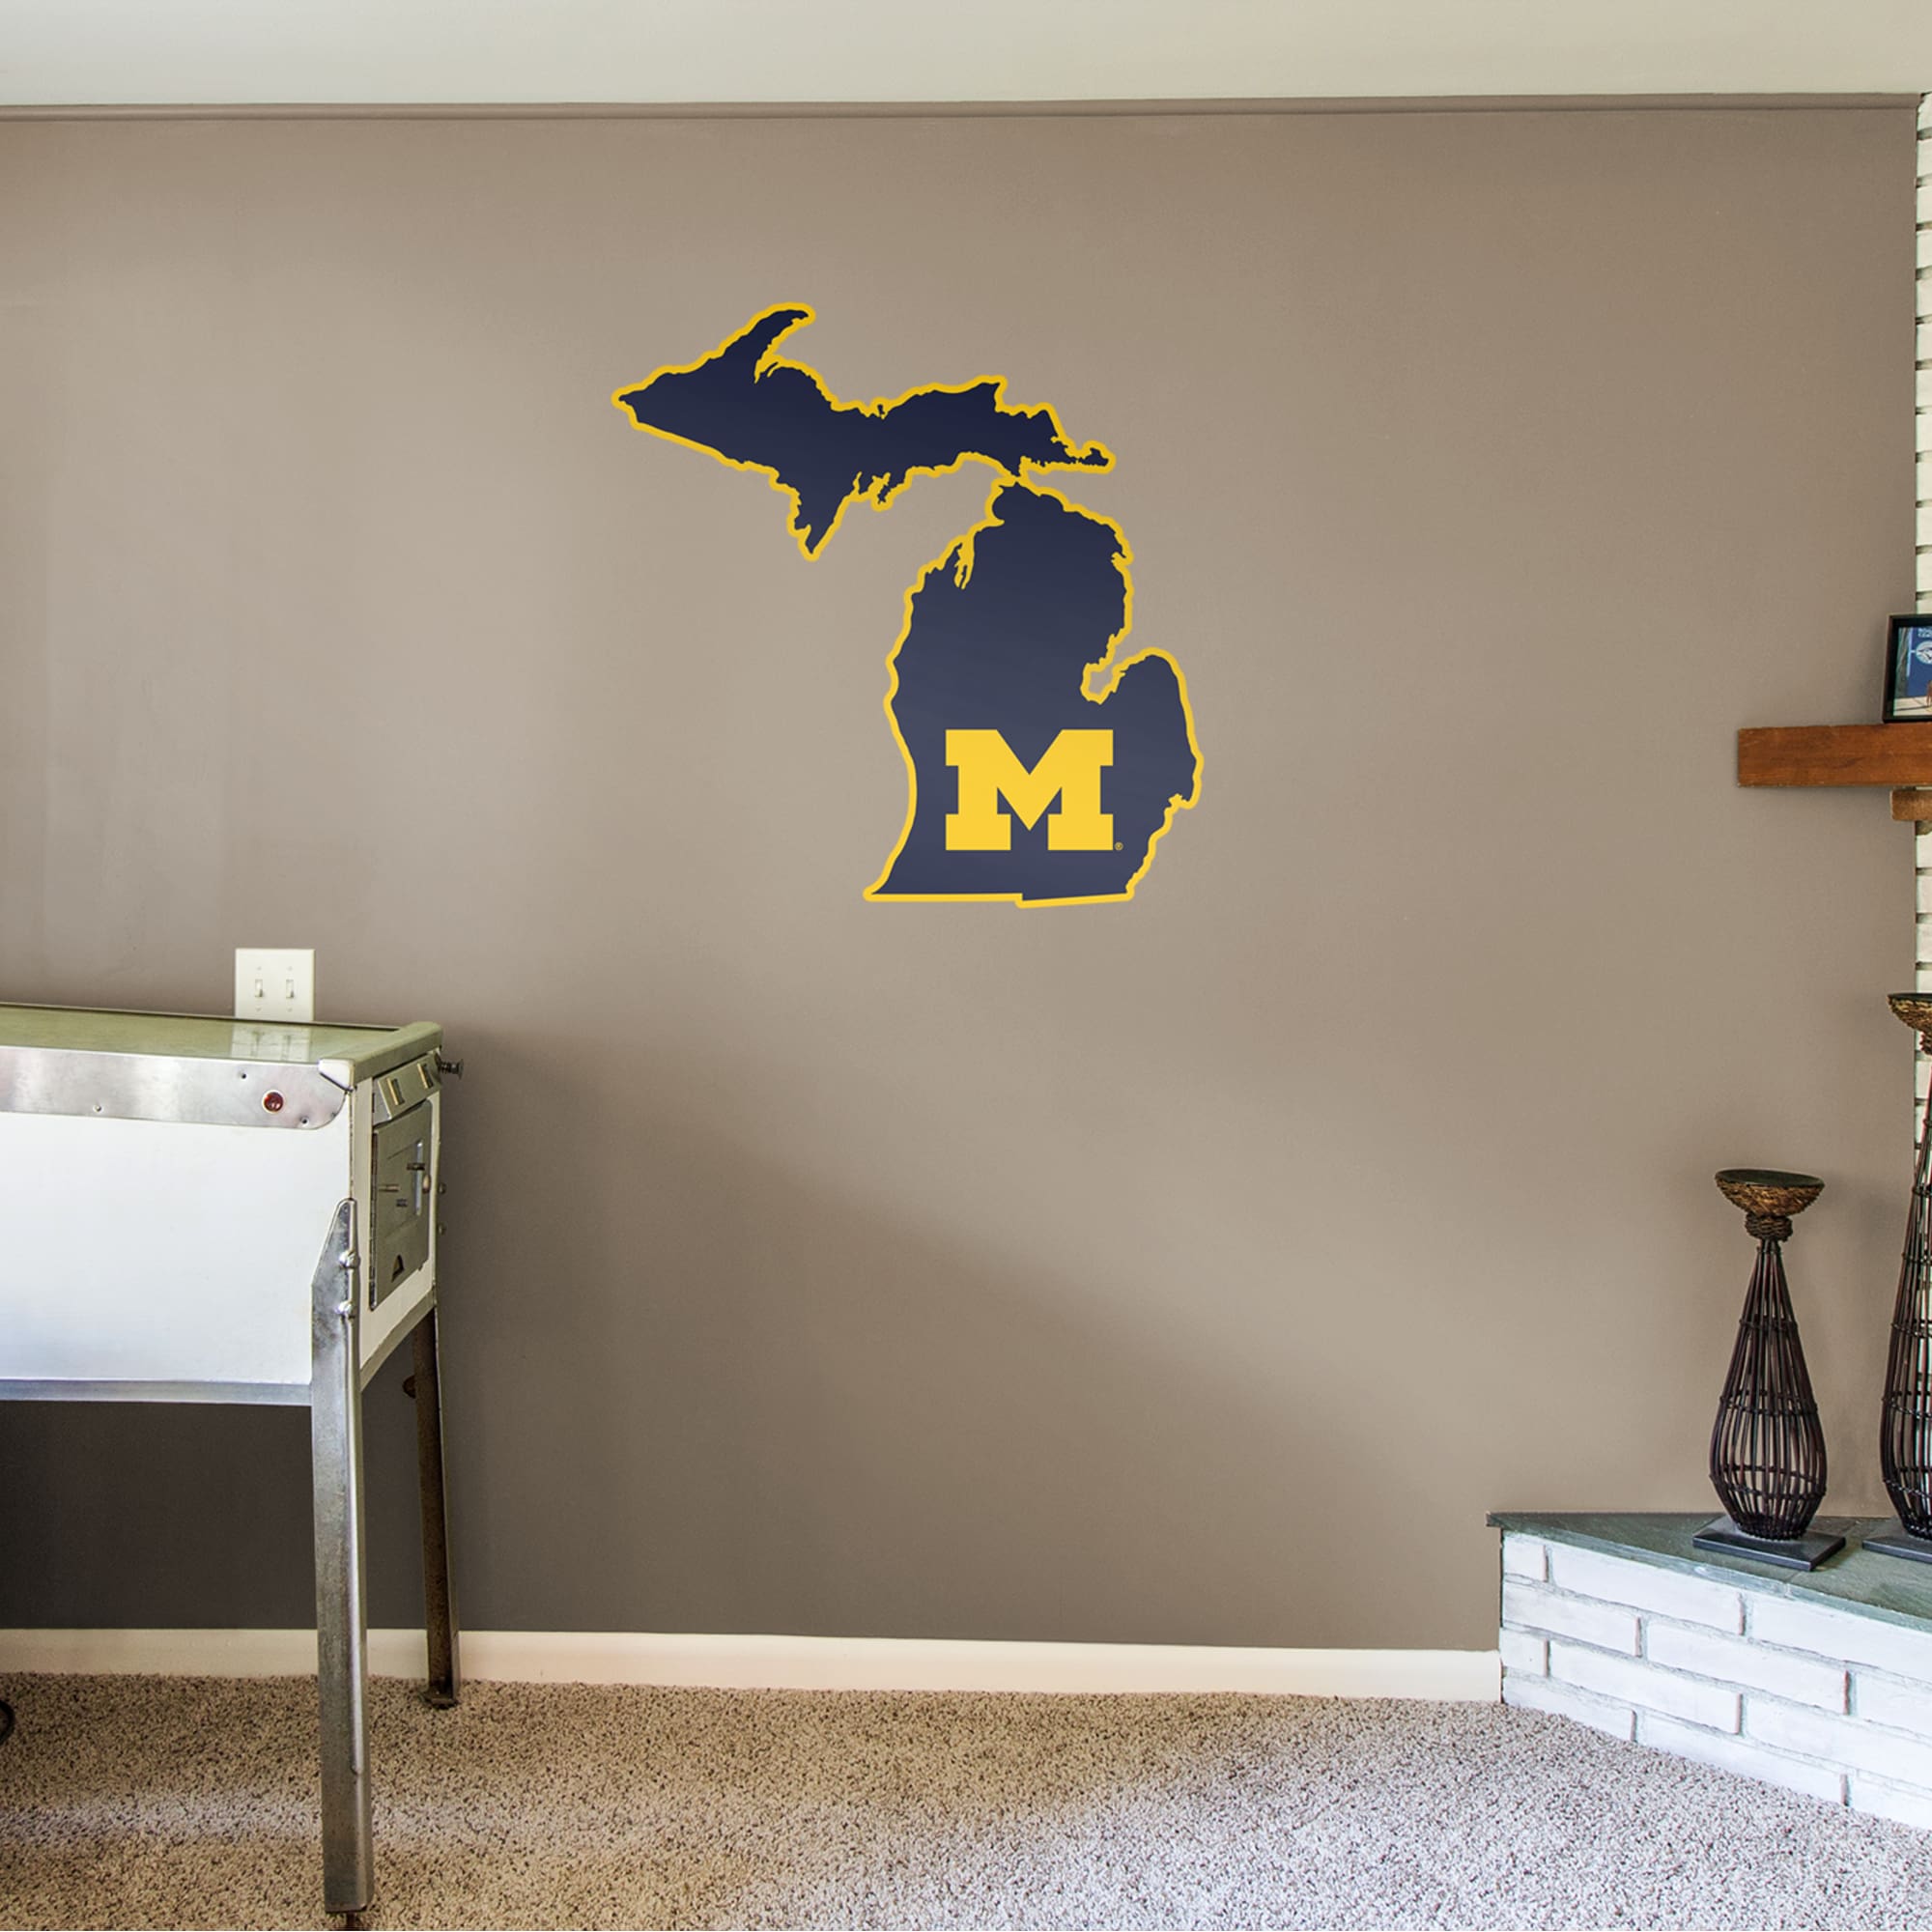 Michigan Wolverines: State of Michigan - Officially Licensed Removable Wall Decal 37.0"W x 38.0"H by Fathead | Vinyl